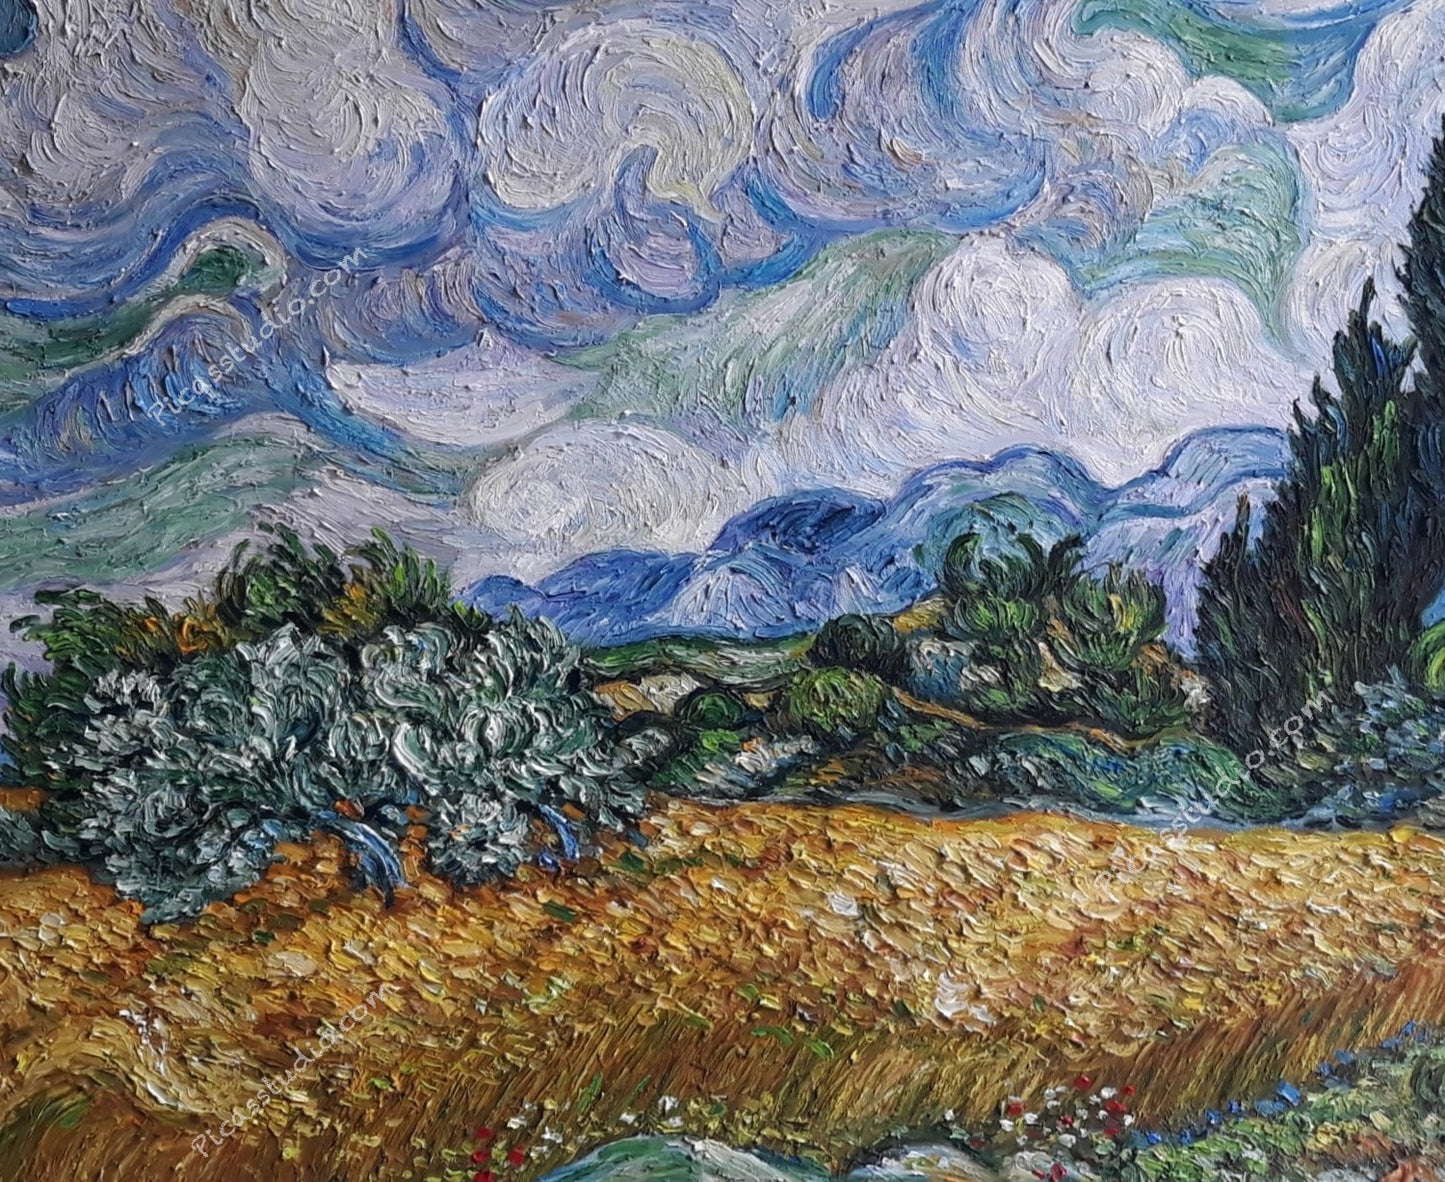 Vincent van Gogh Wheat Field with Cypresses Oil Painting Hand Painted Art on Canvas Wall Decor Unframed